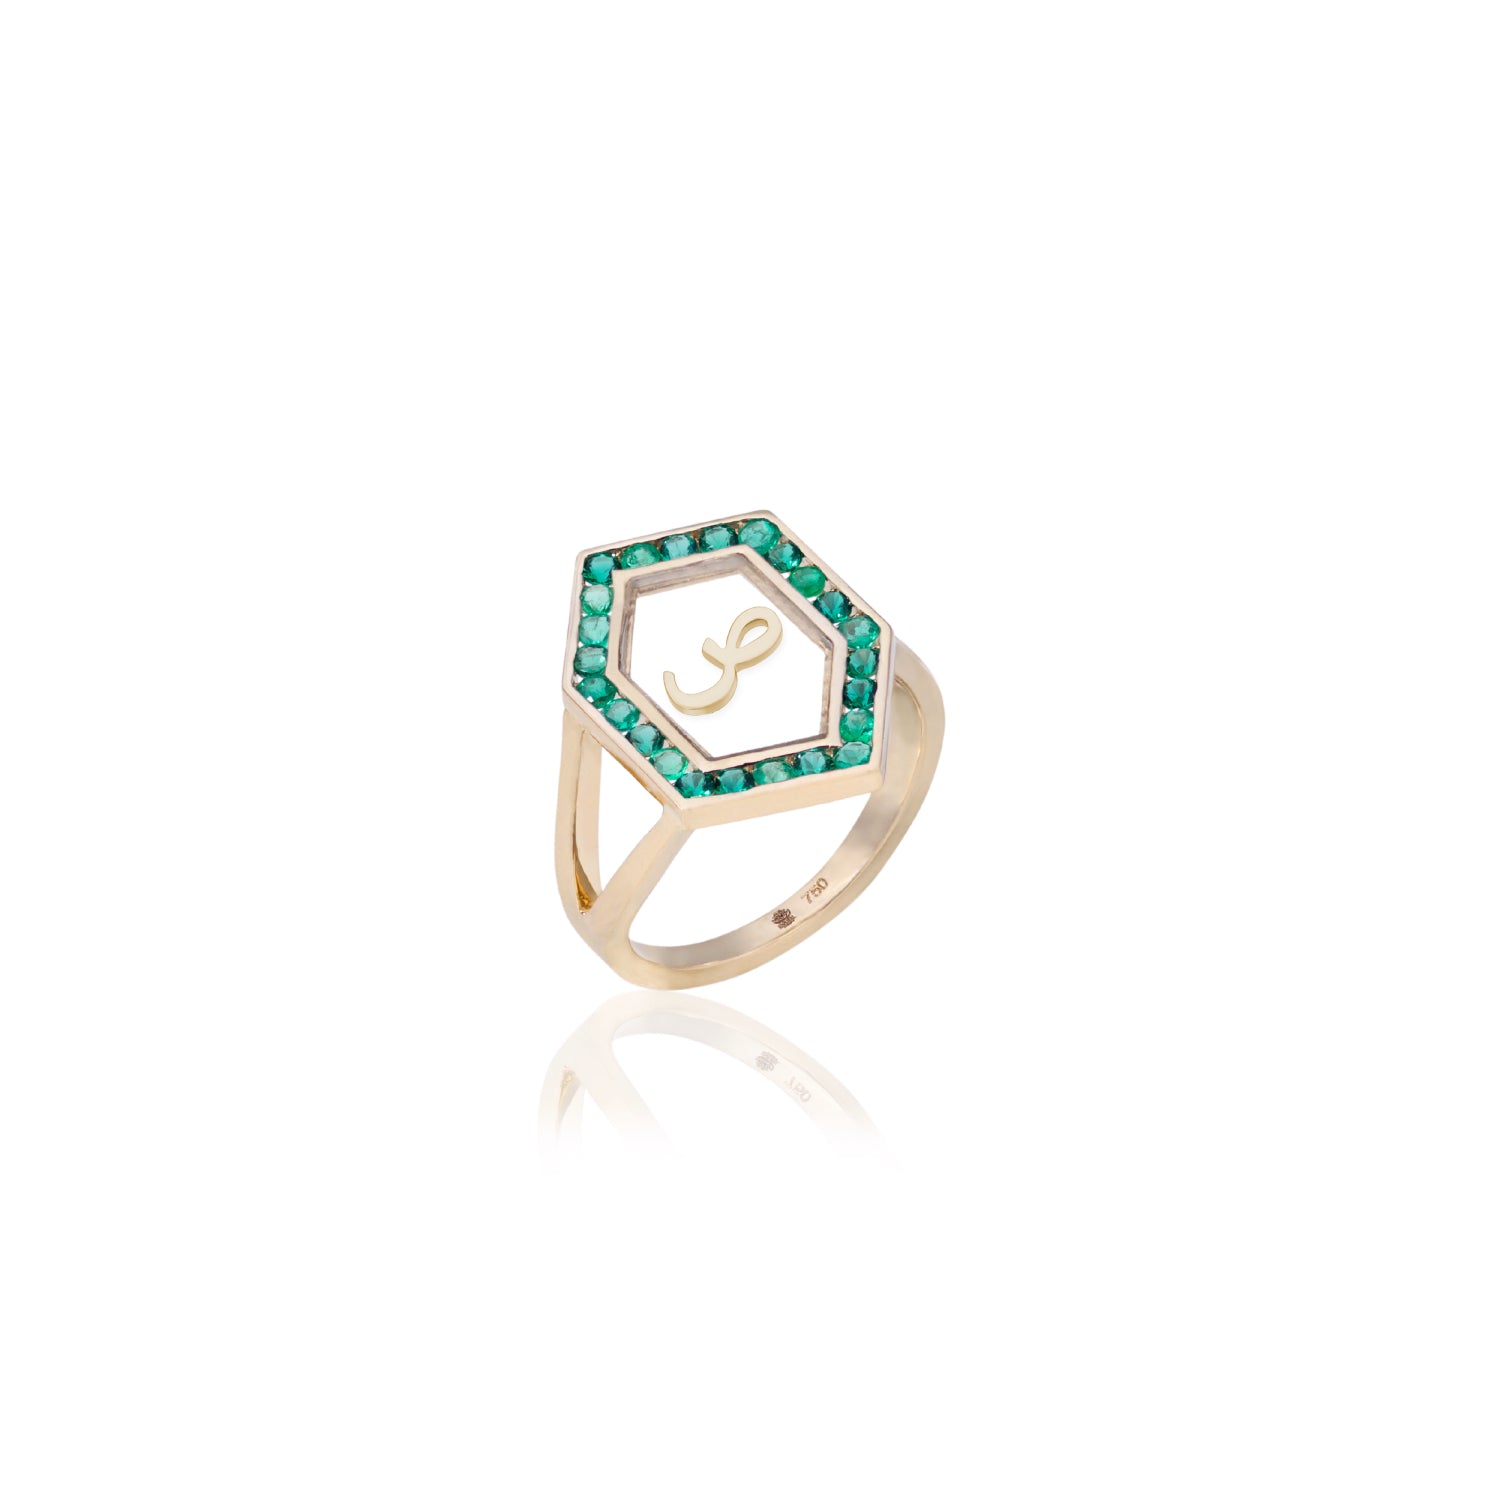 Qamoos 1.0 Letter ص Emerald Ring in Yellow Gold